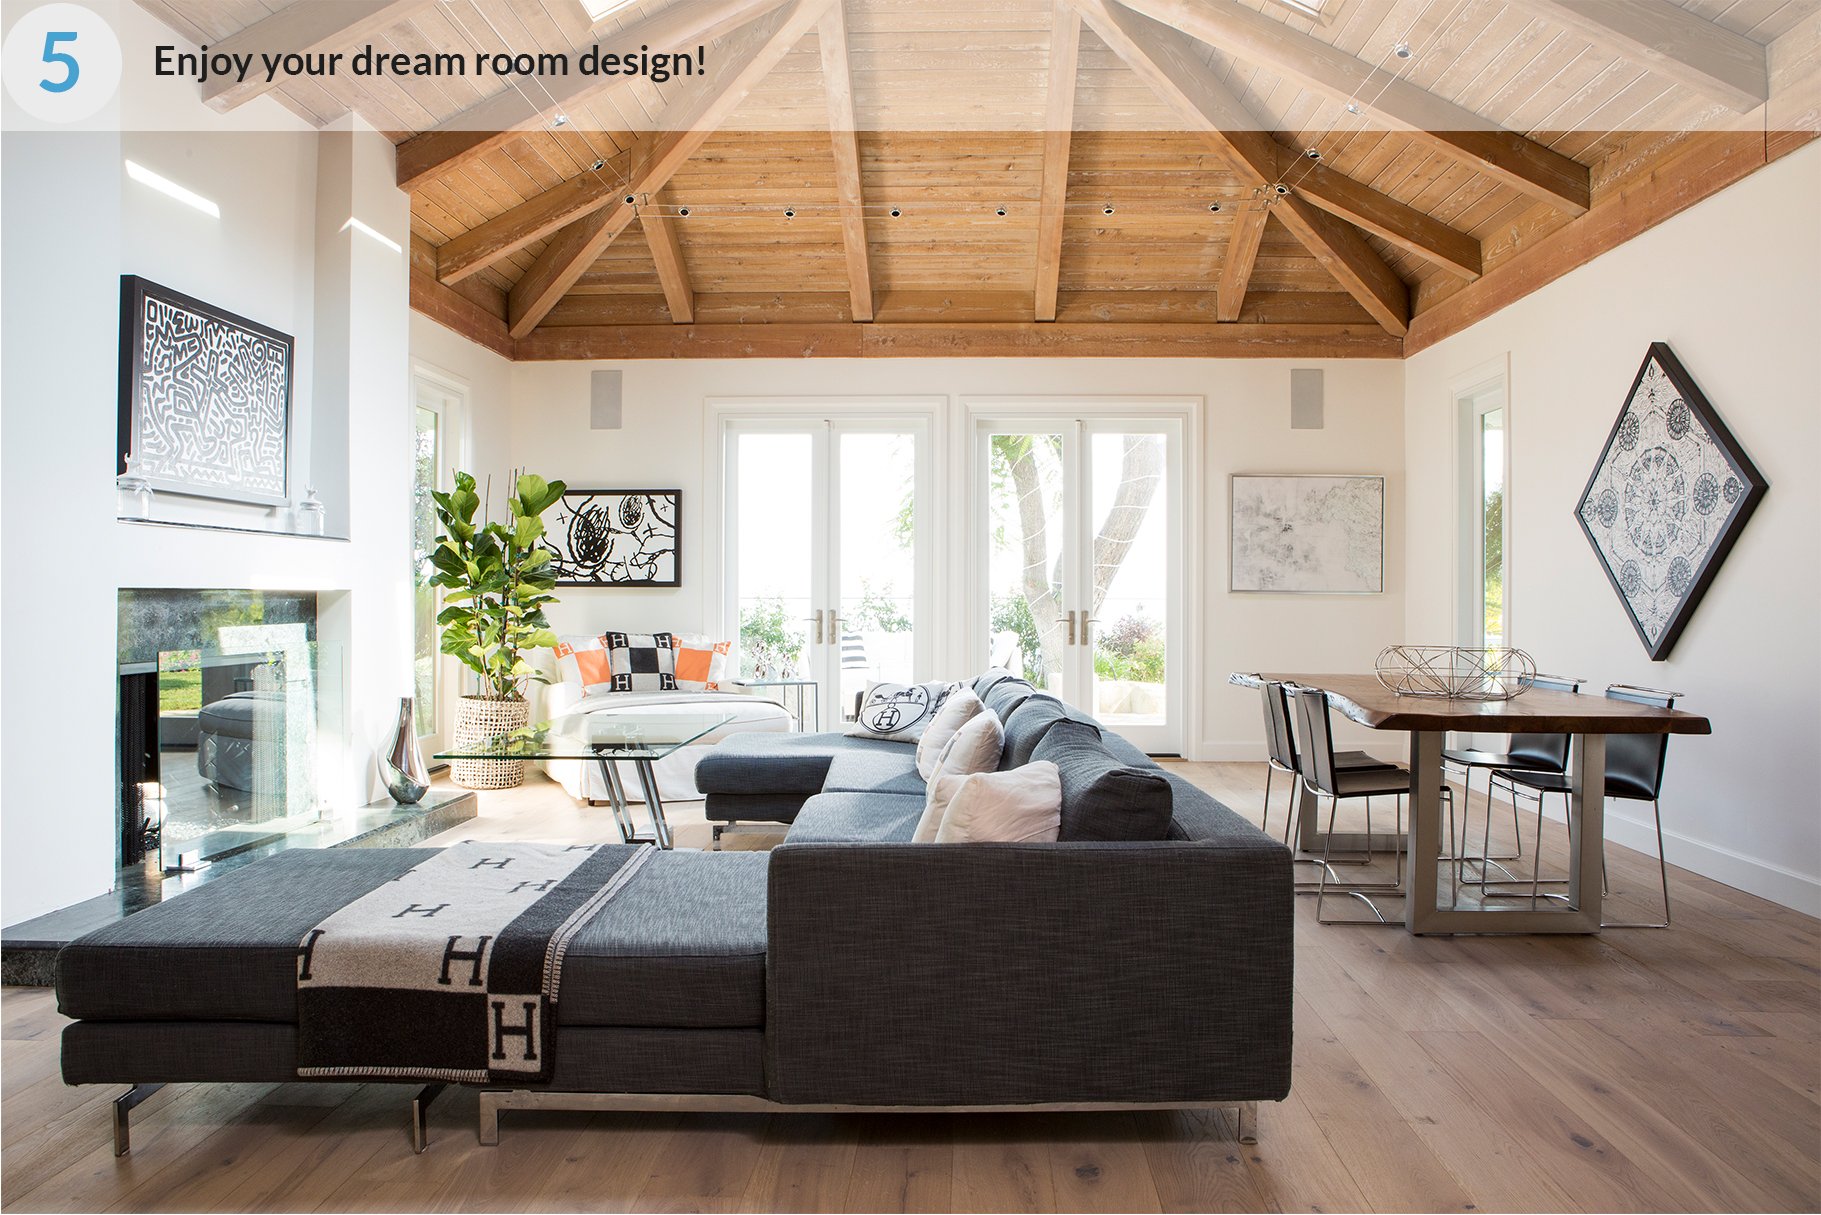 Online interior design process ends with your dream room